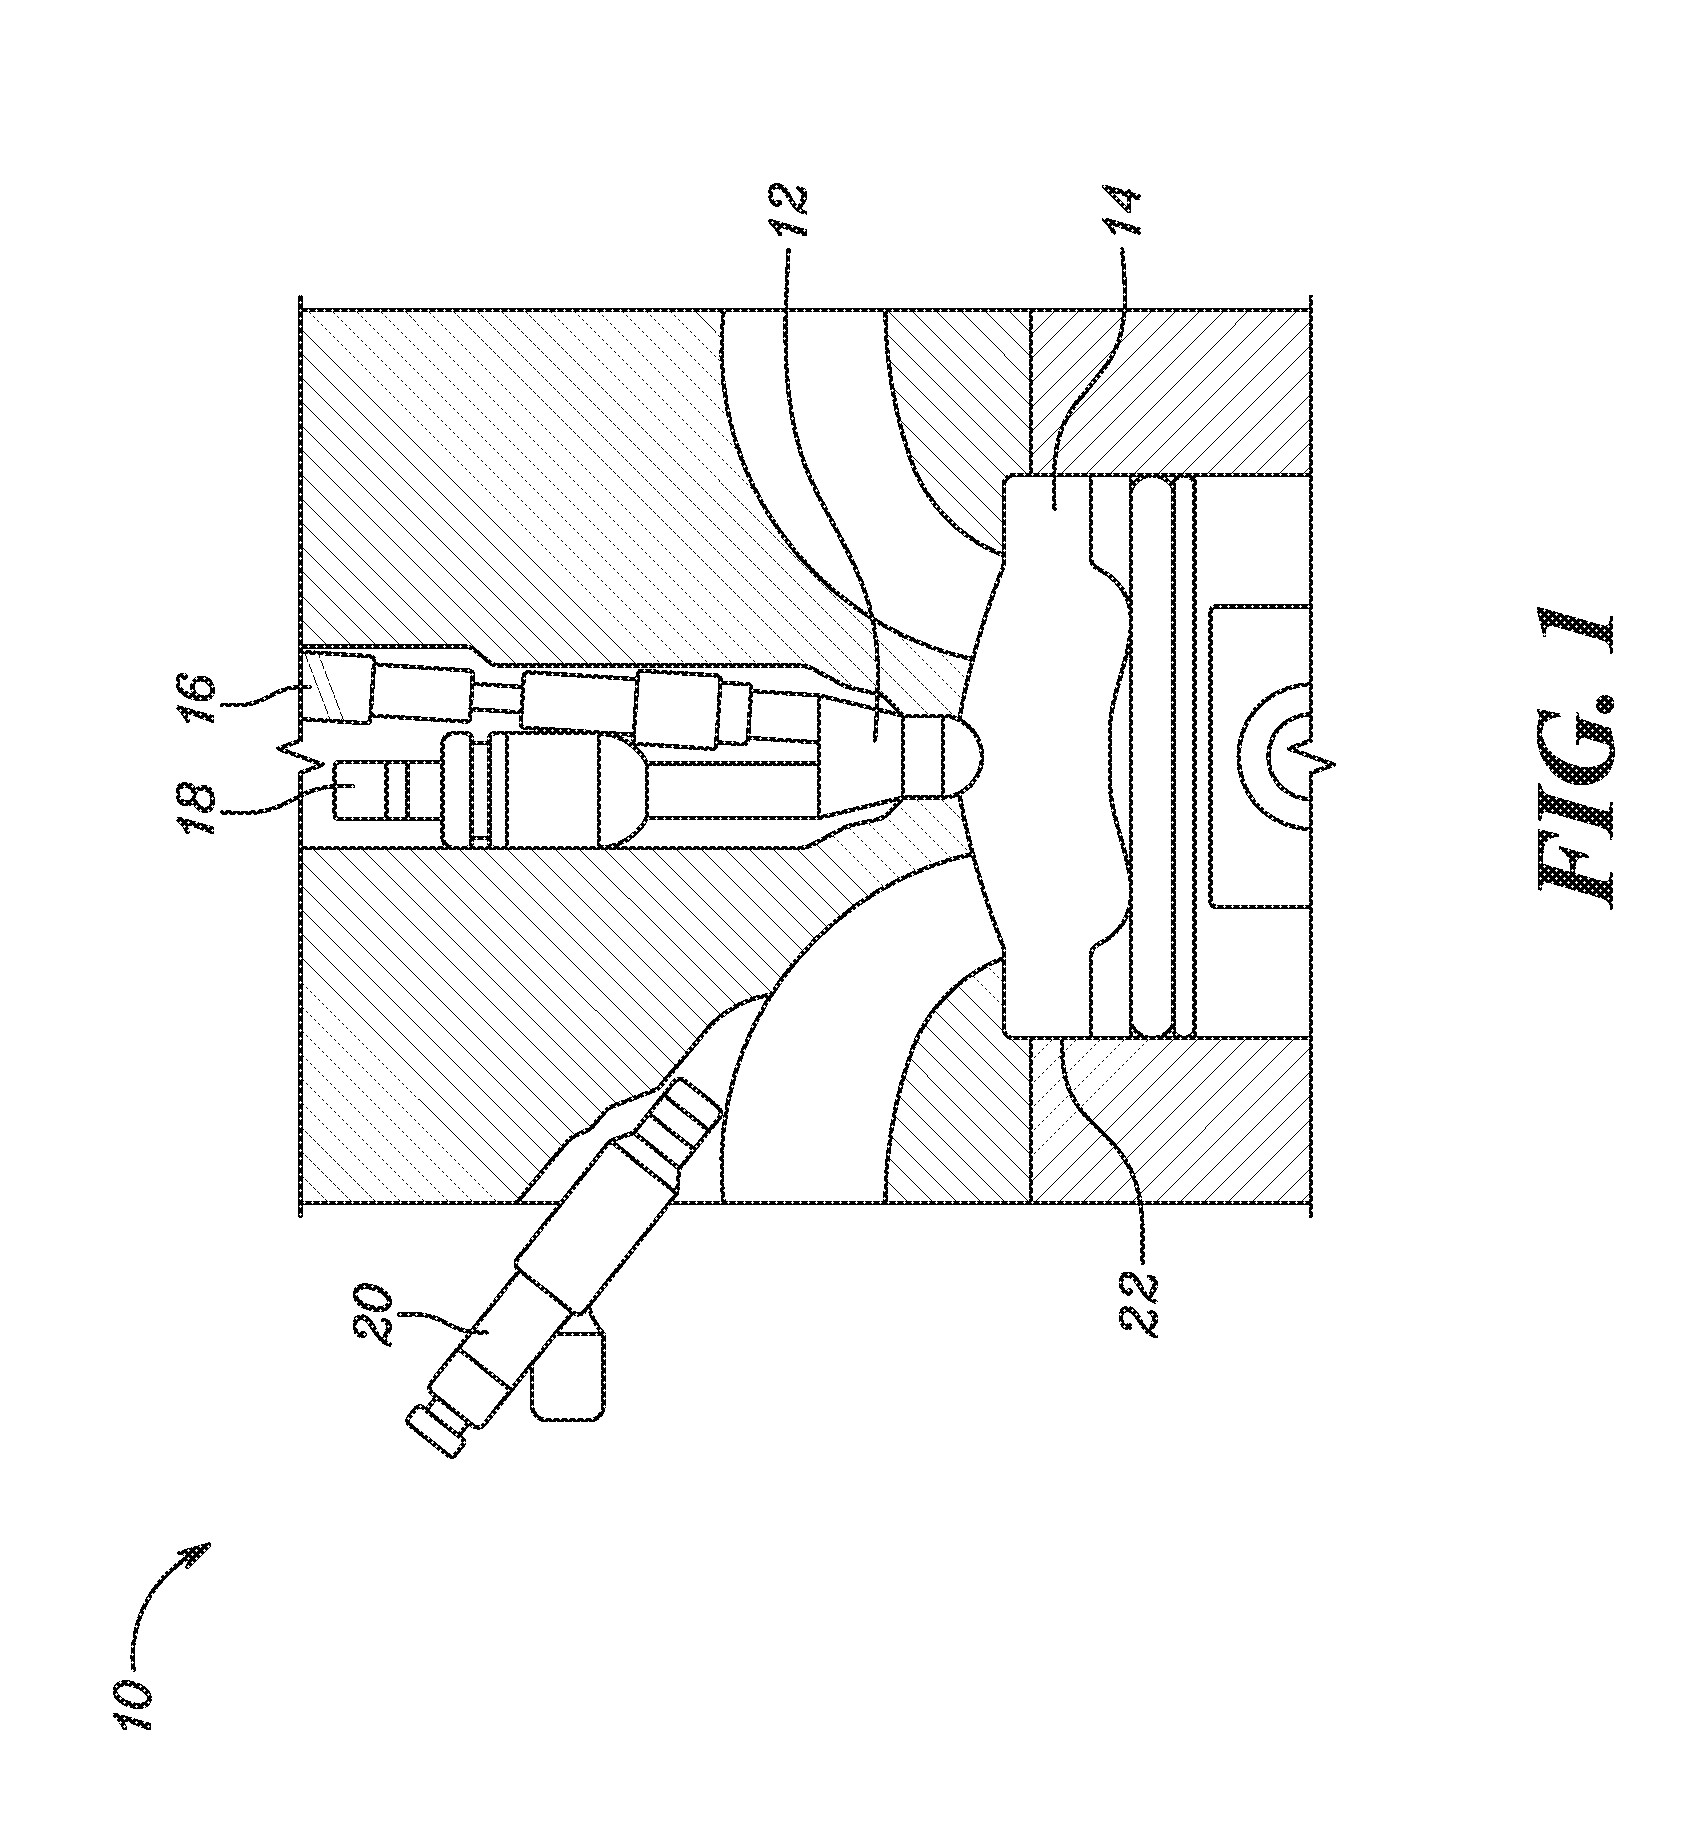 Fuel reformer system for multiple combustion chambers